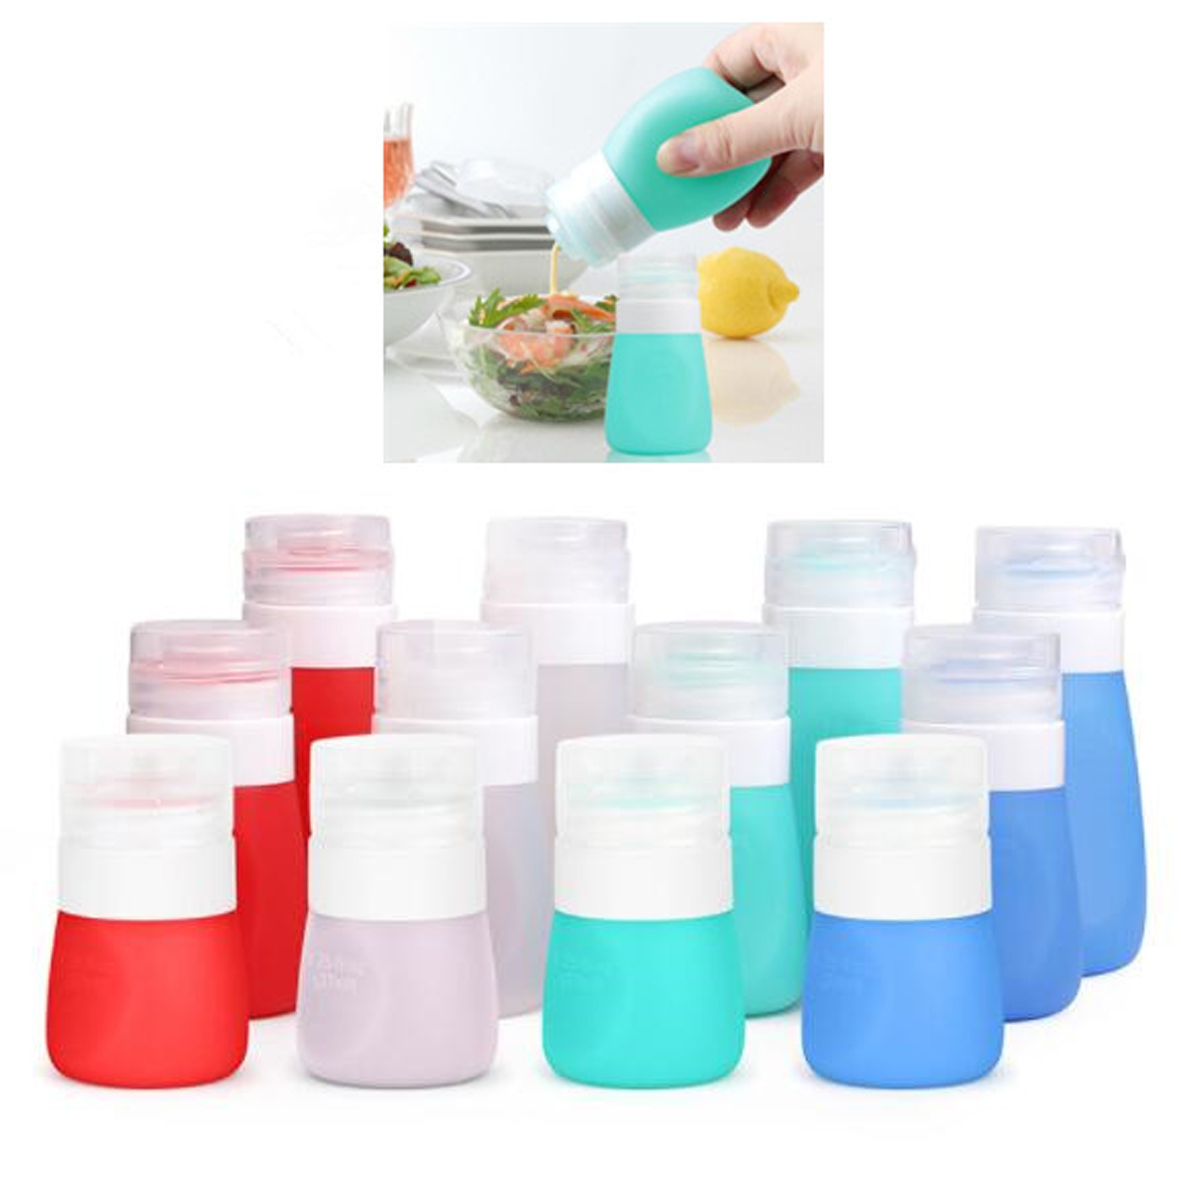 GL-ELY1197 85ml Silicone Cooking Oil Bottle